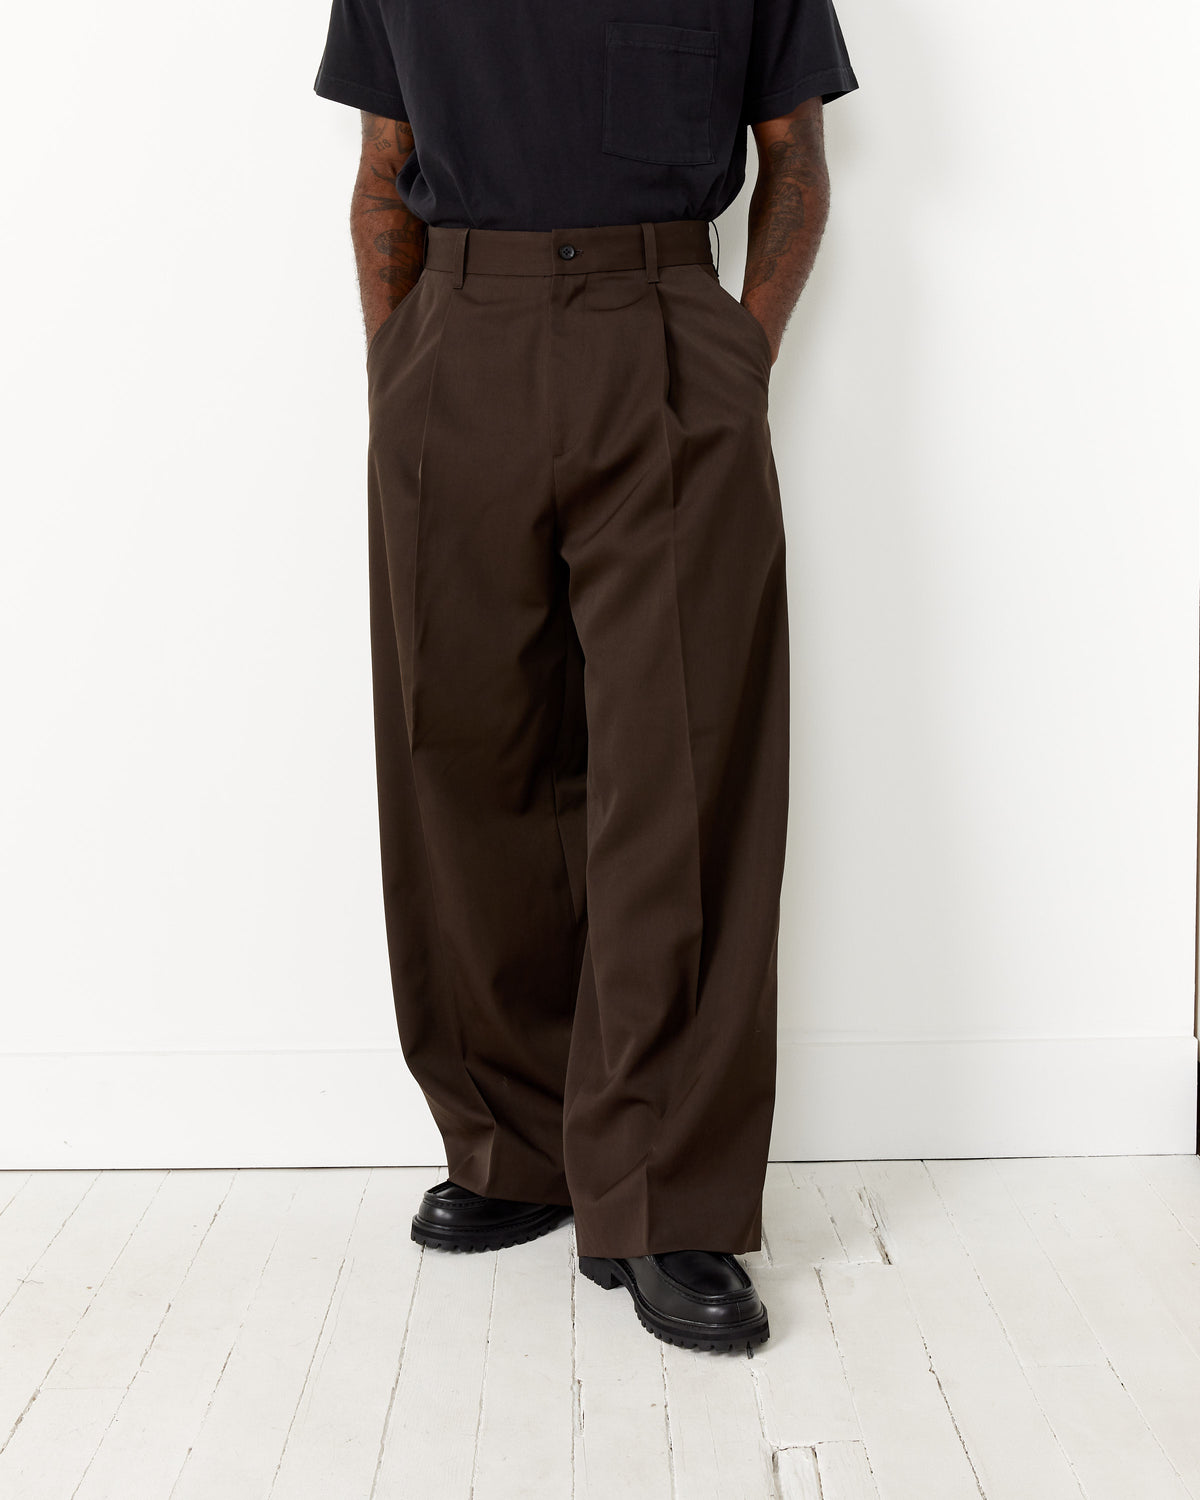 Find our carefully selected selection of premium St.646 Pant Stein